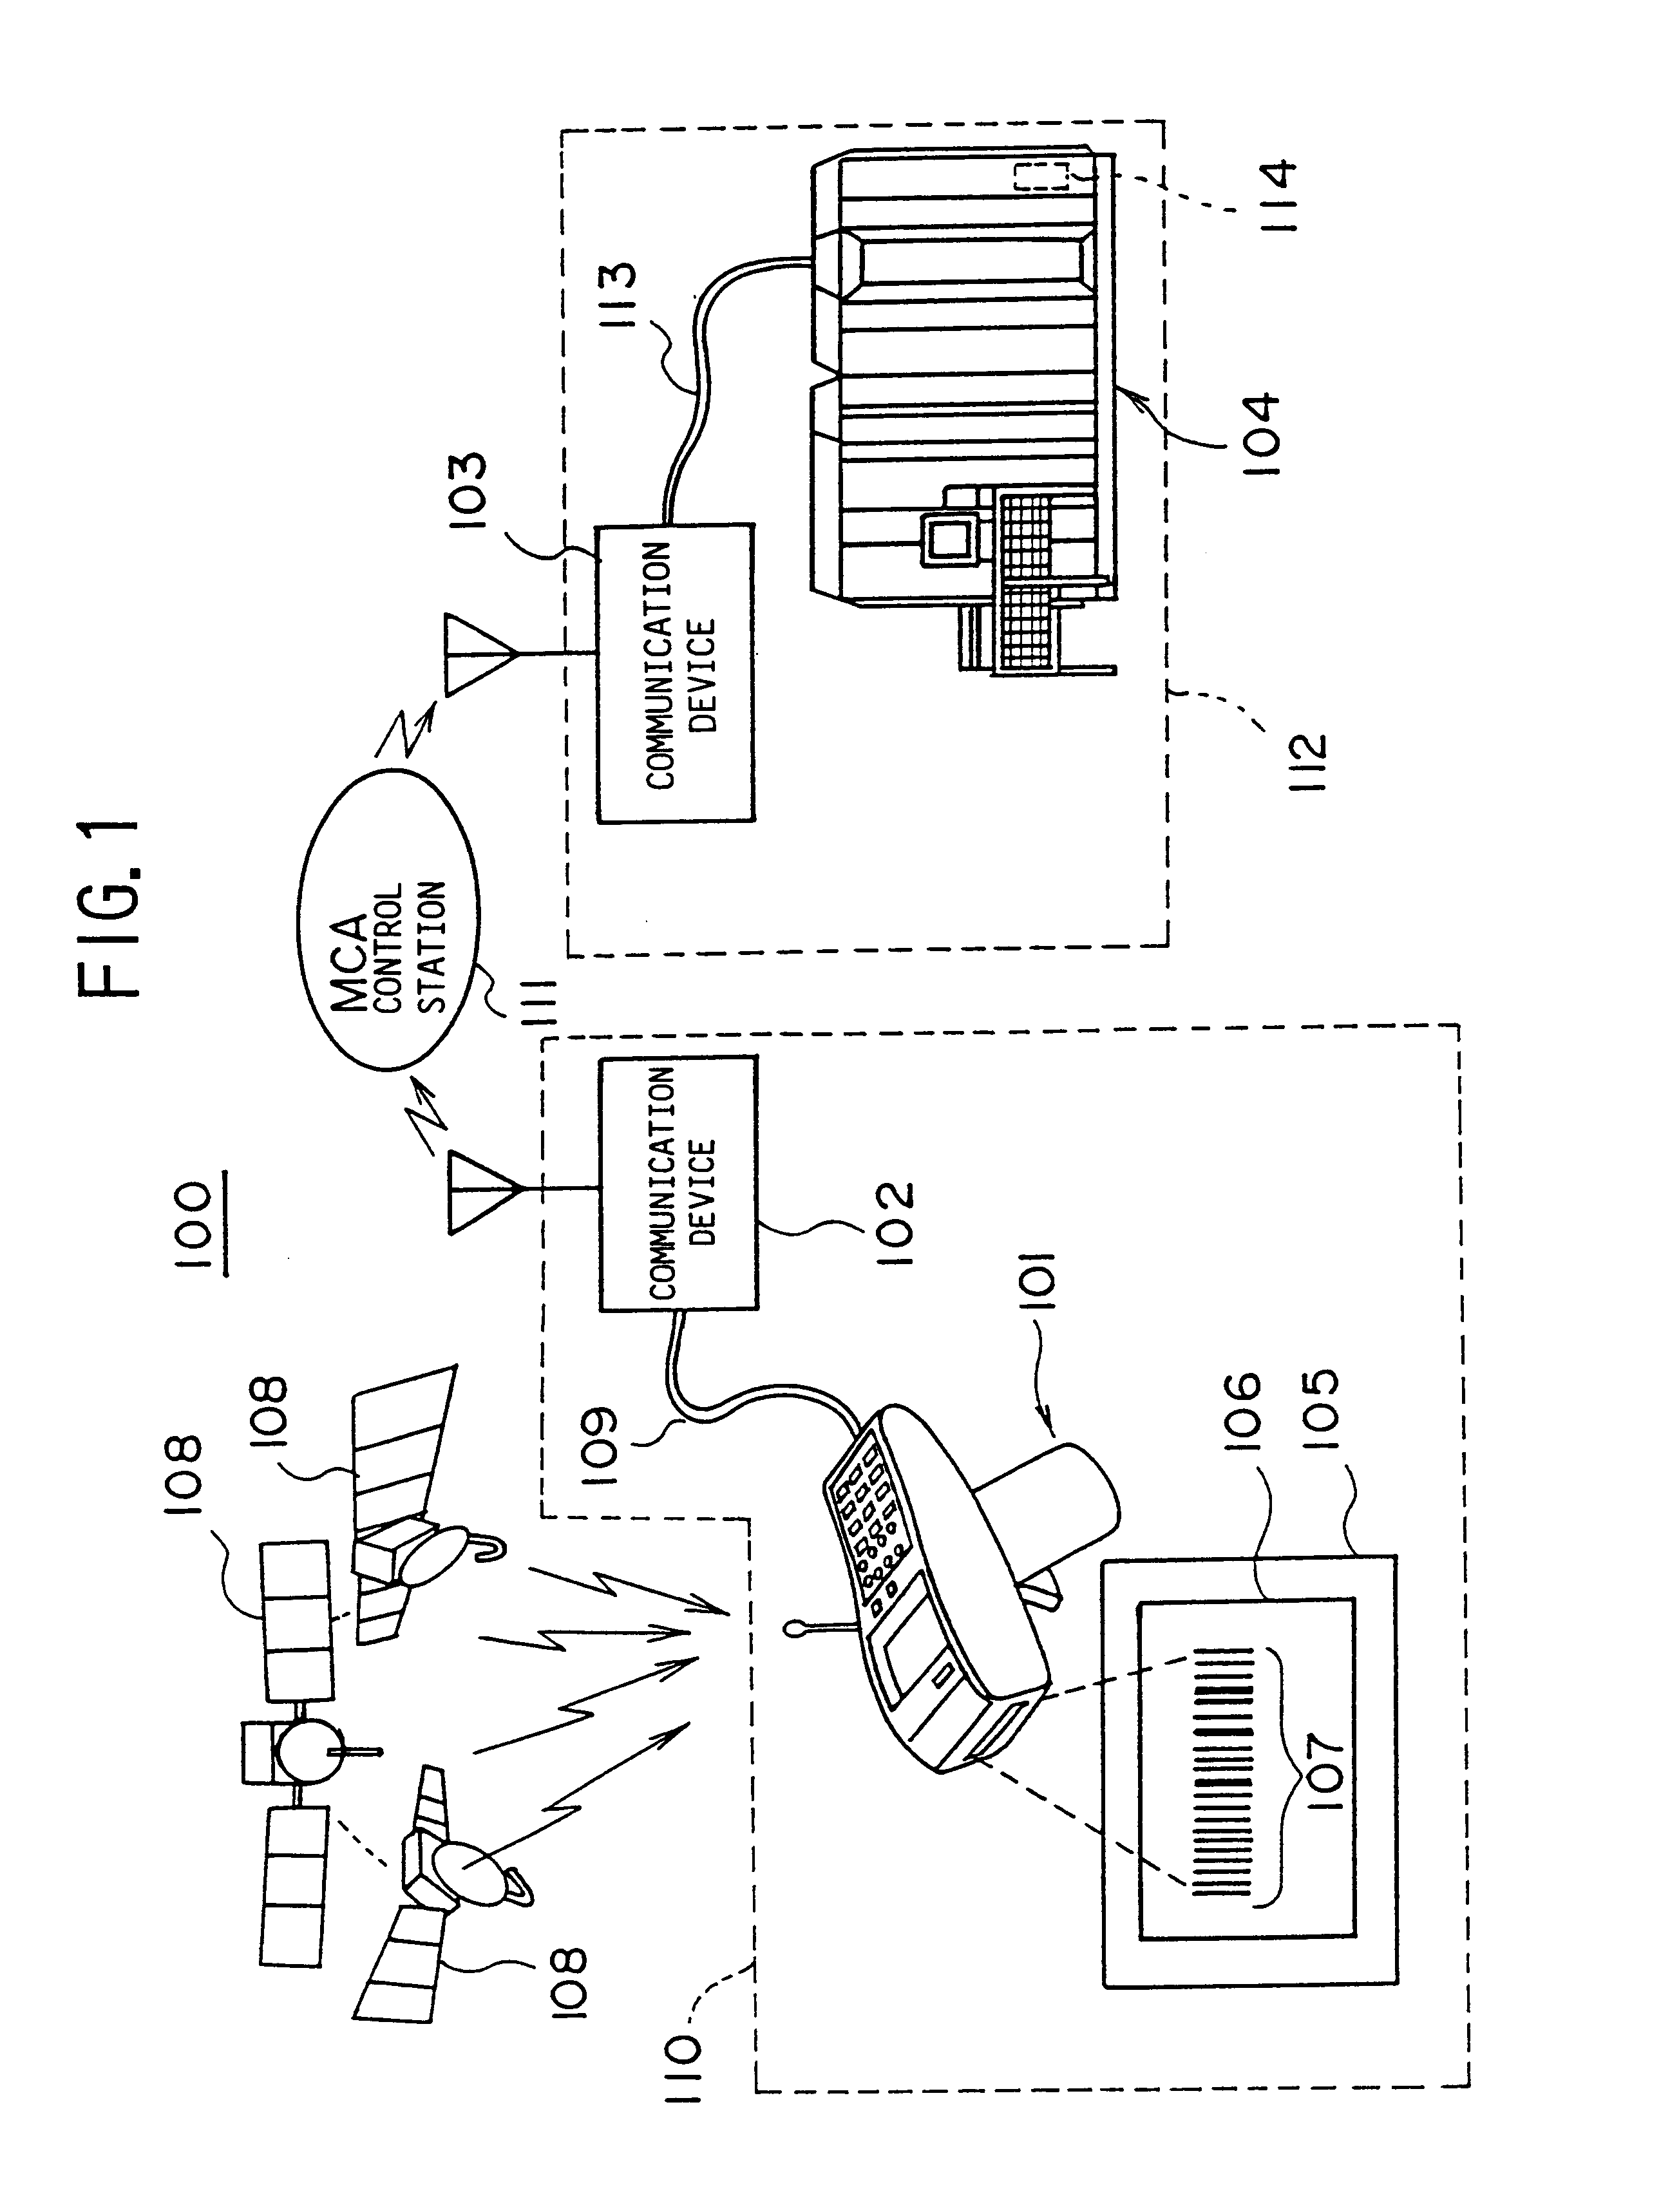 Portable terminal apparatus and related information management system and method with concurrent position detection and information collection